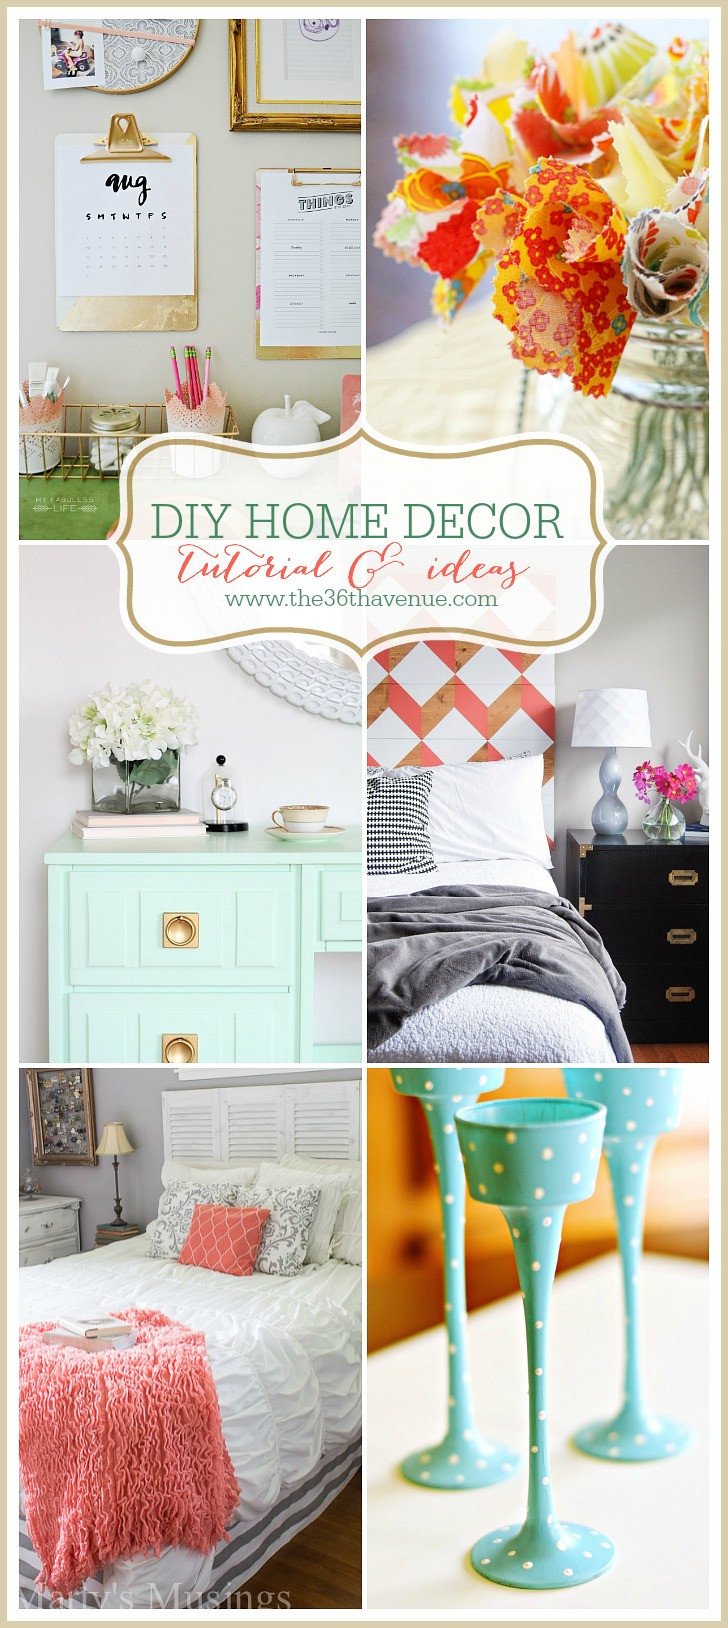 Diy Craft for Home Decor Beautiful the 36th Avenue Home Decor Diy Projects